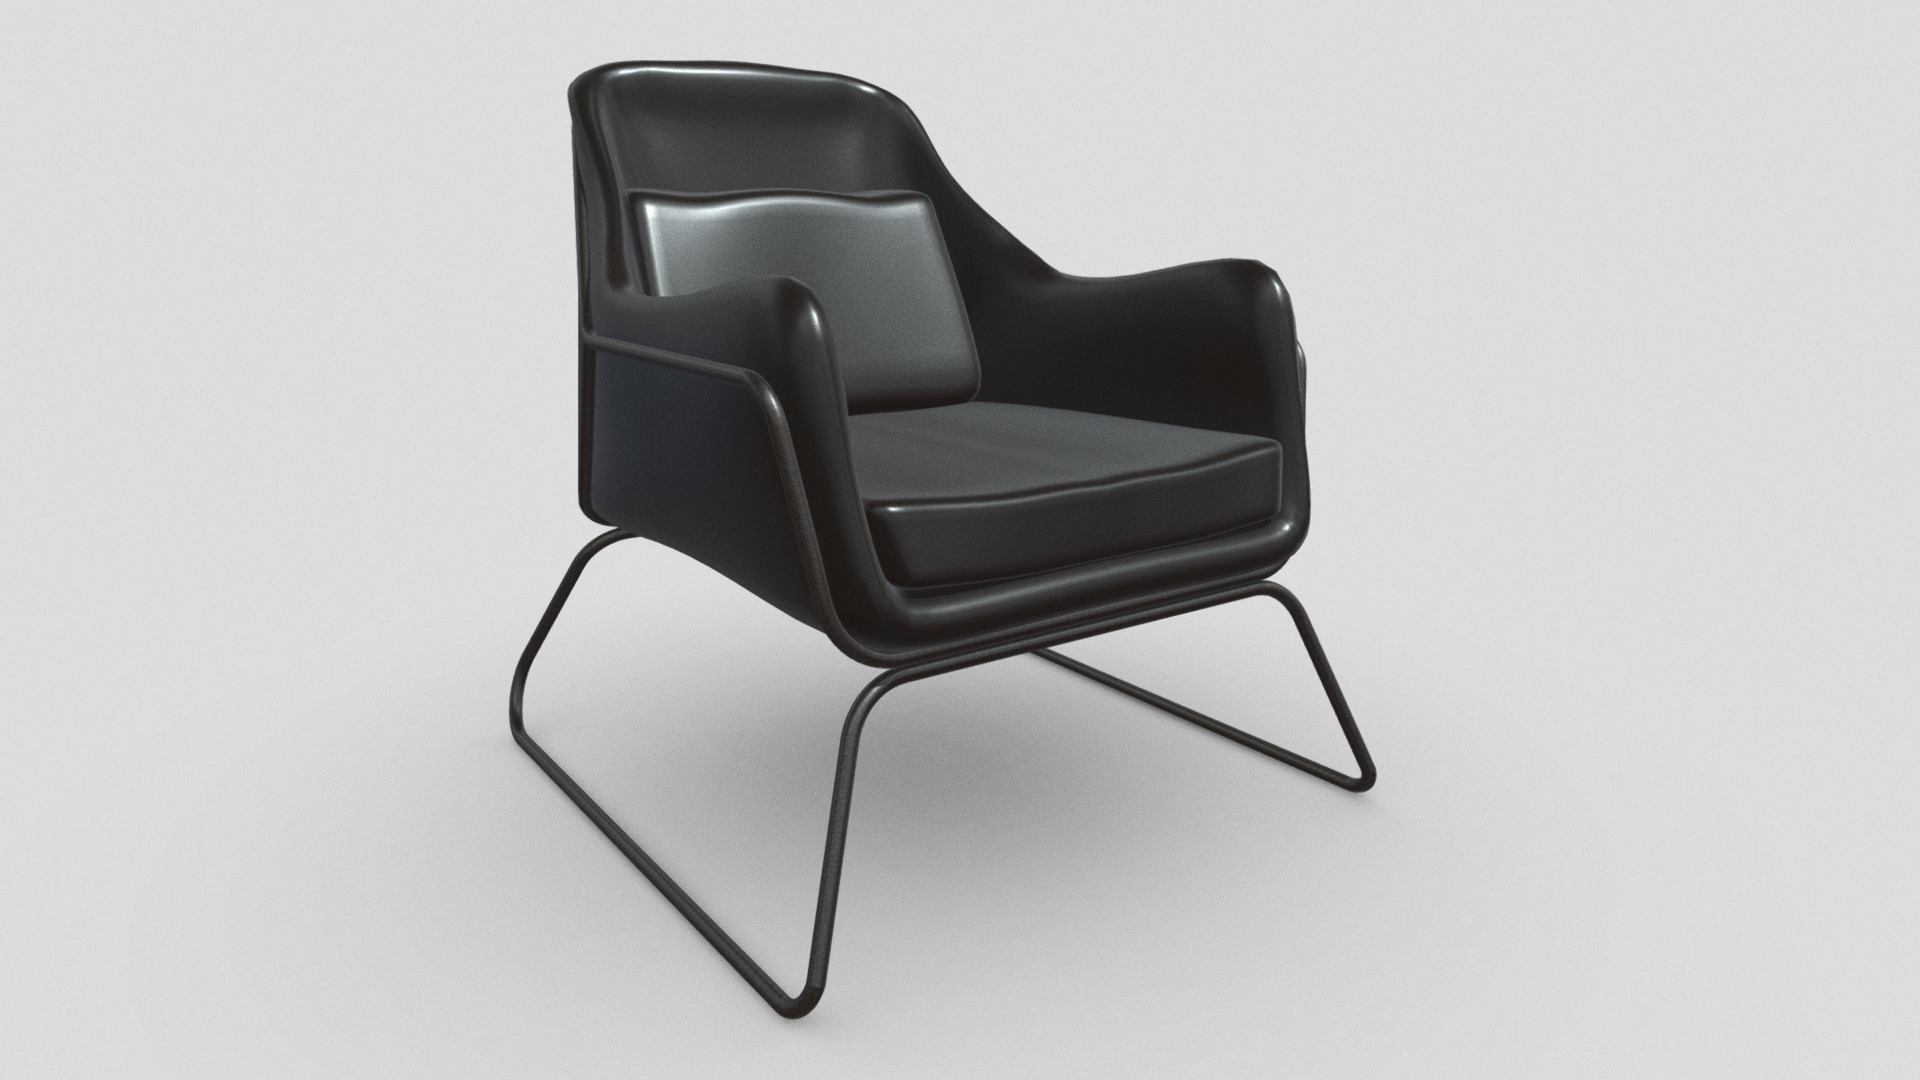 3D model Leather Wire Mid-century Modern Chair - This is a 3D model of the Leather Wire Mid-century Modern Chair. The 3D model is about a black office chair.